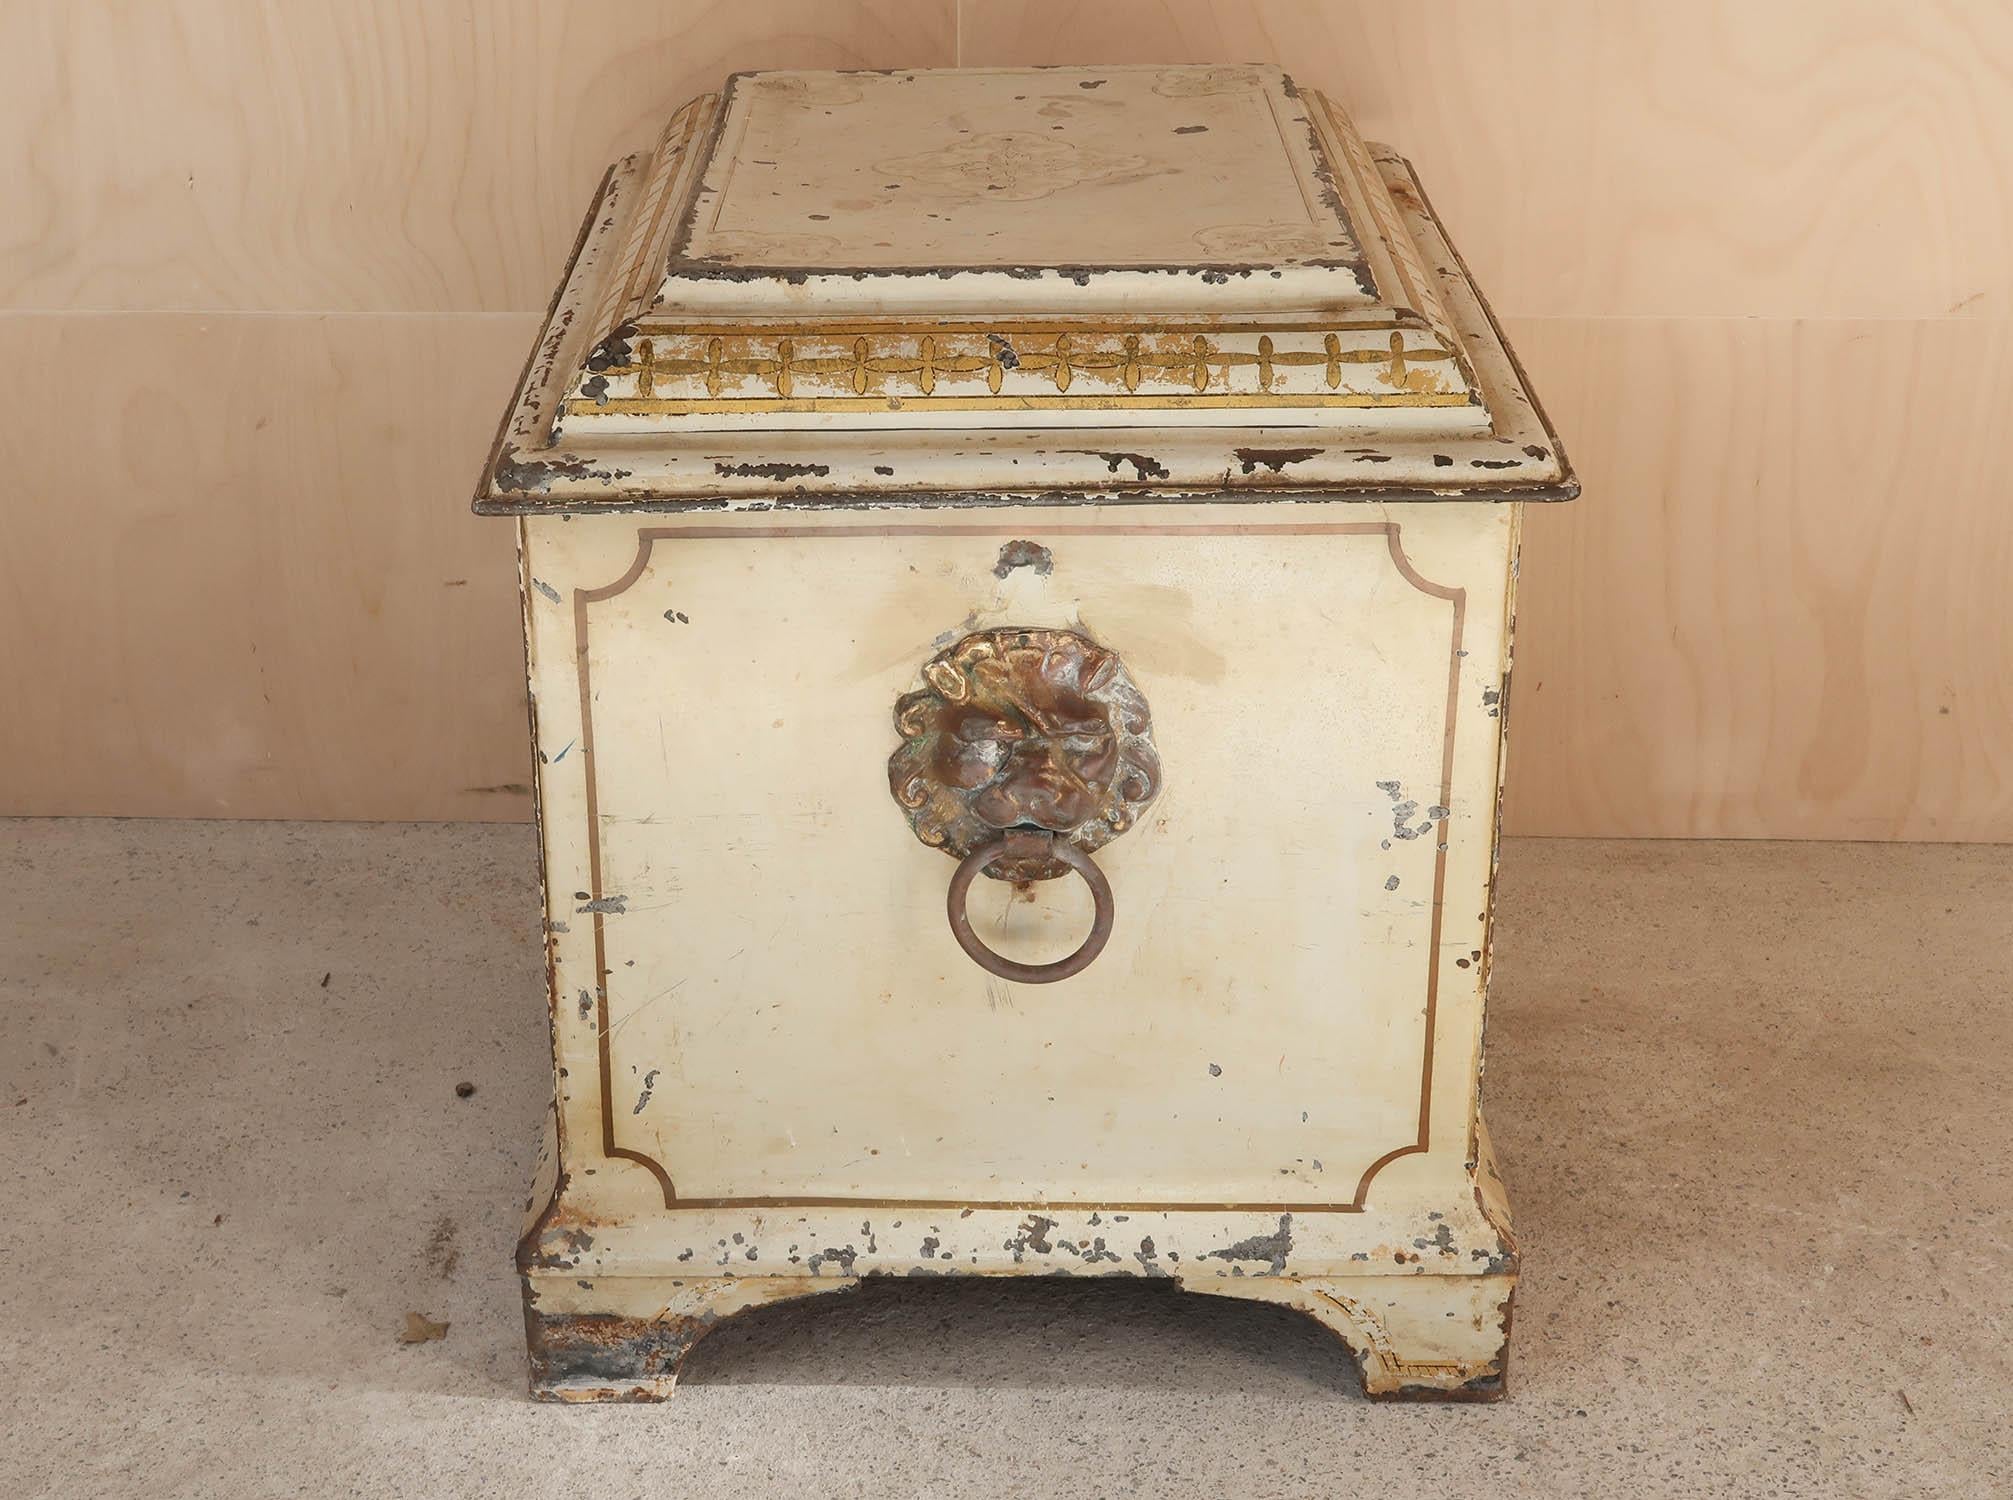 Antique Cream Painted Toleware Chest. Henry Loveridge Maker. English C.1850 For Sale 1